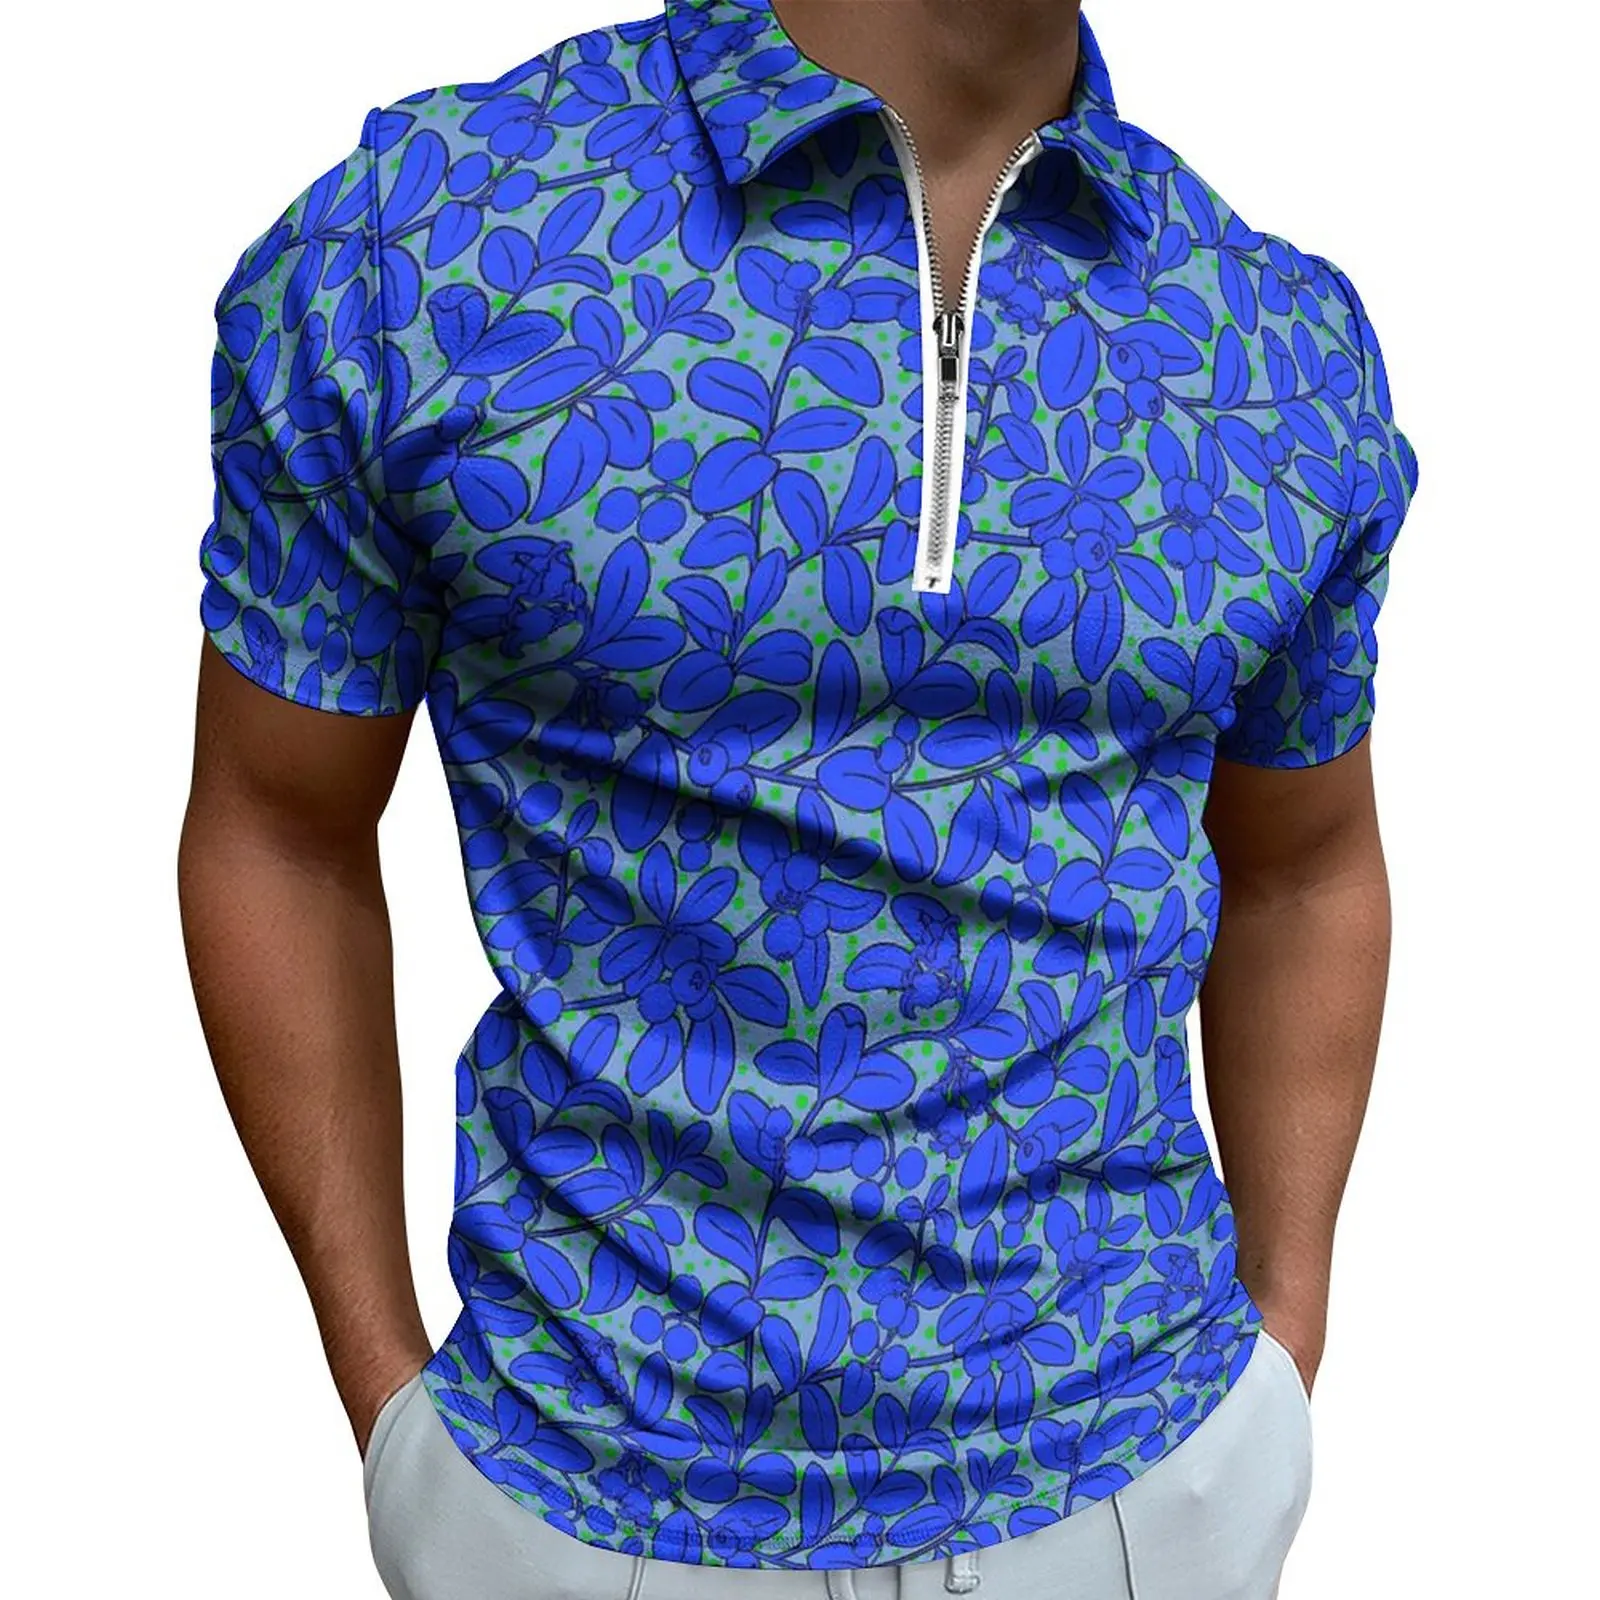 

Plants Print Casual Polo Shirts Blue Leaves Print T-Shirts Man Short-Sleeved Graphic Shirt Beach Trending Oversize Tops Gift Ide